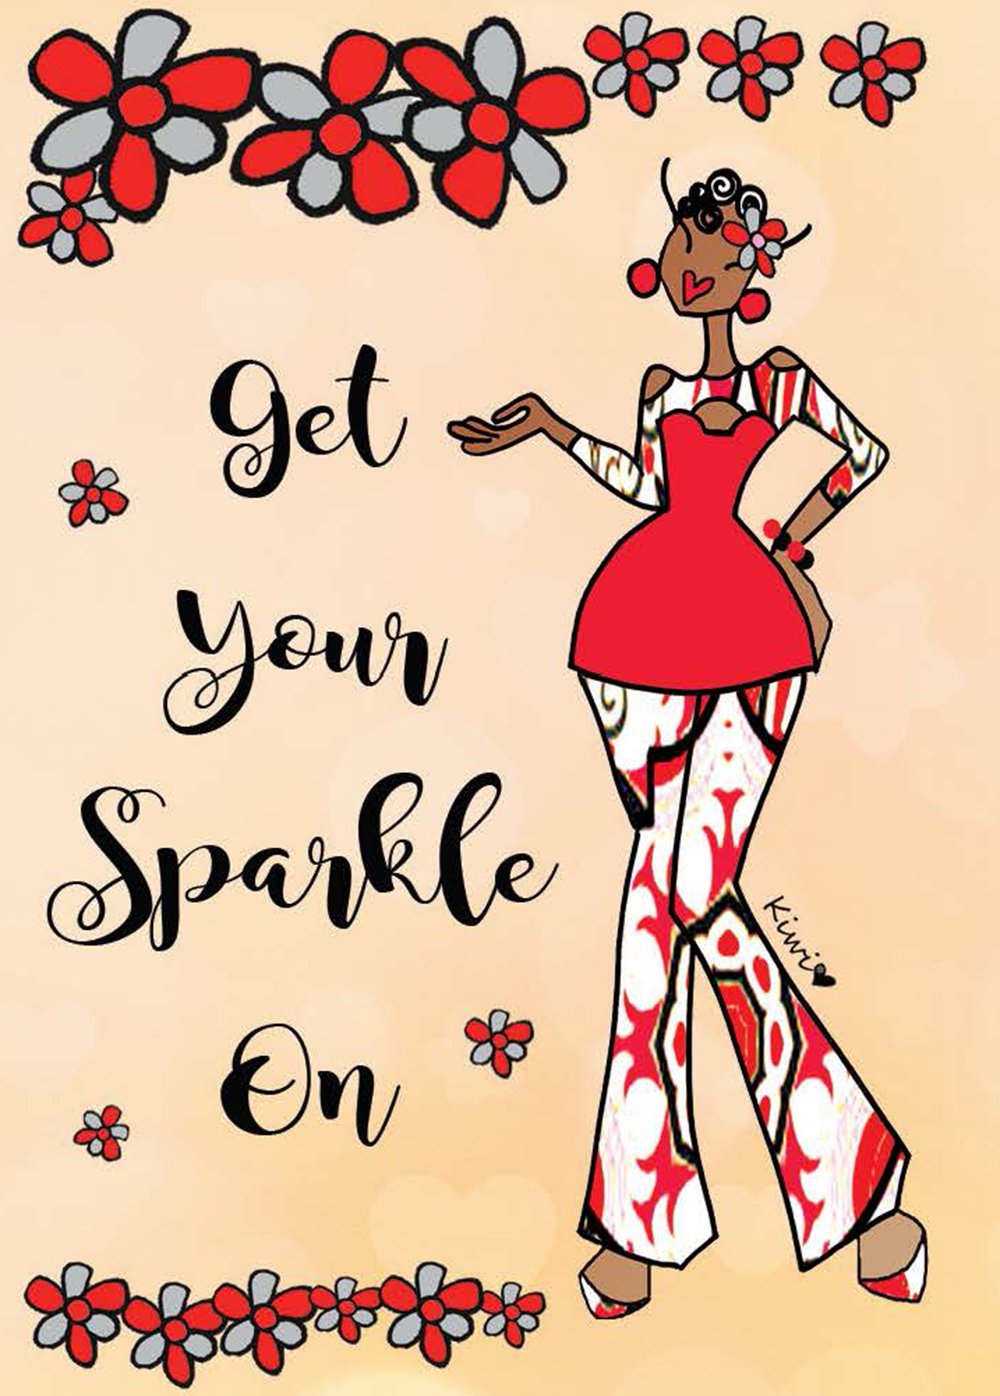 Get Your Sparkle On: African American Magnet by Kiwi McDowell